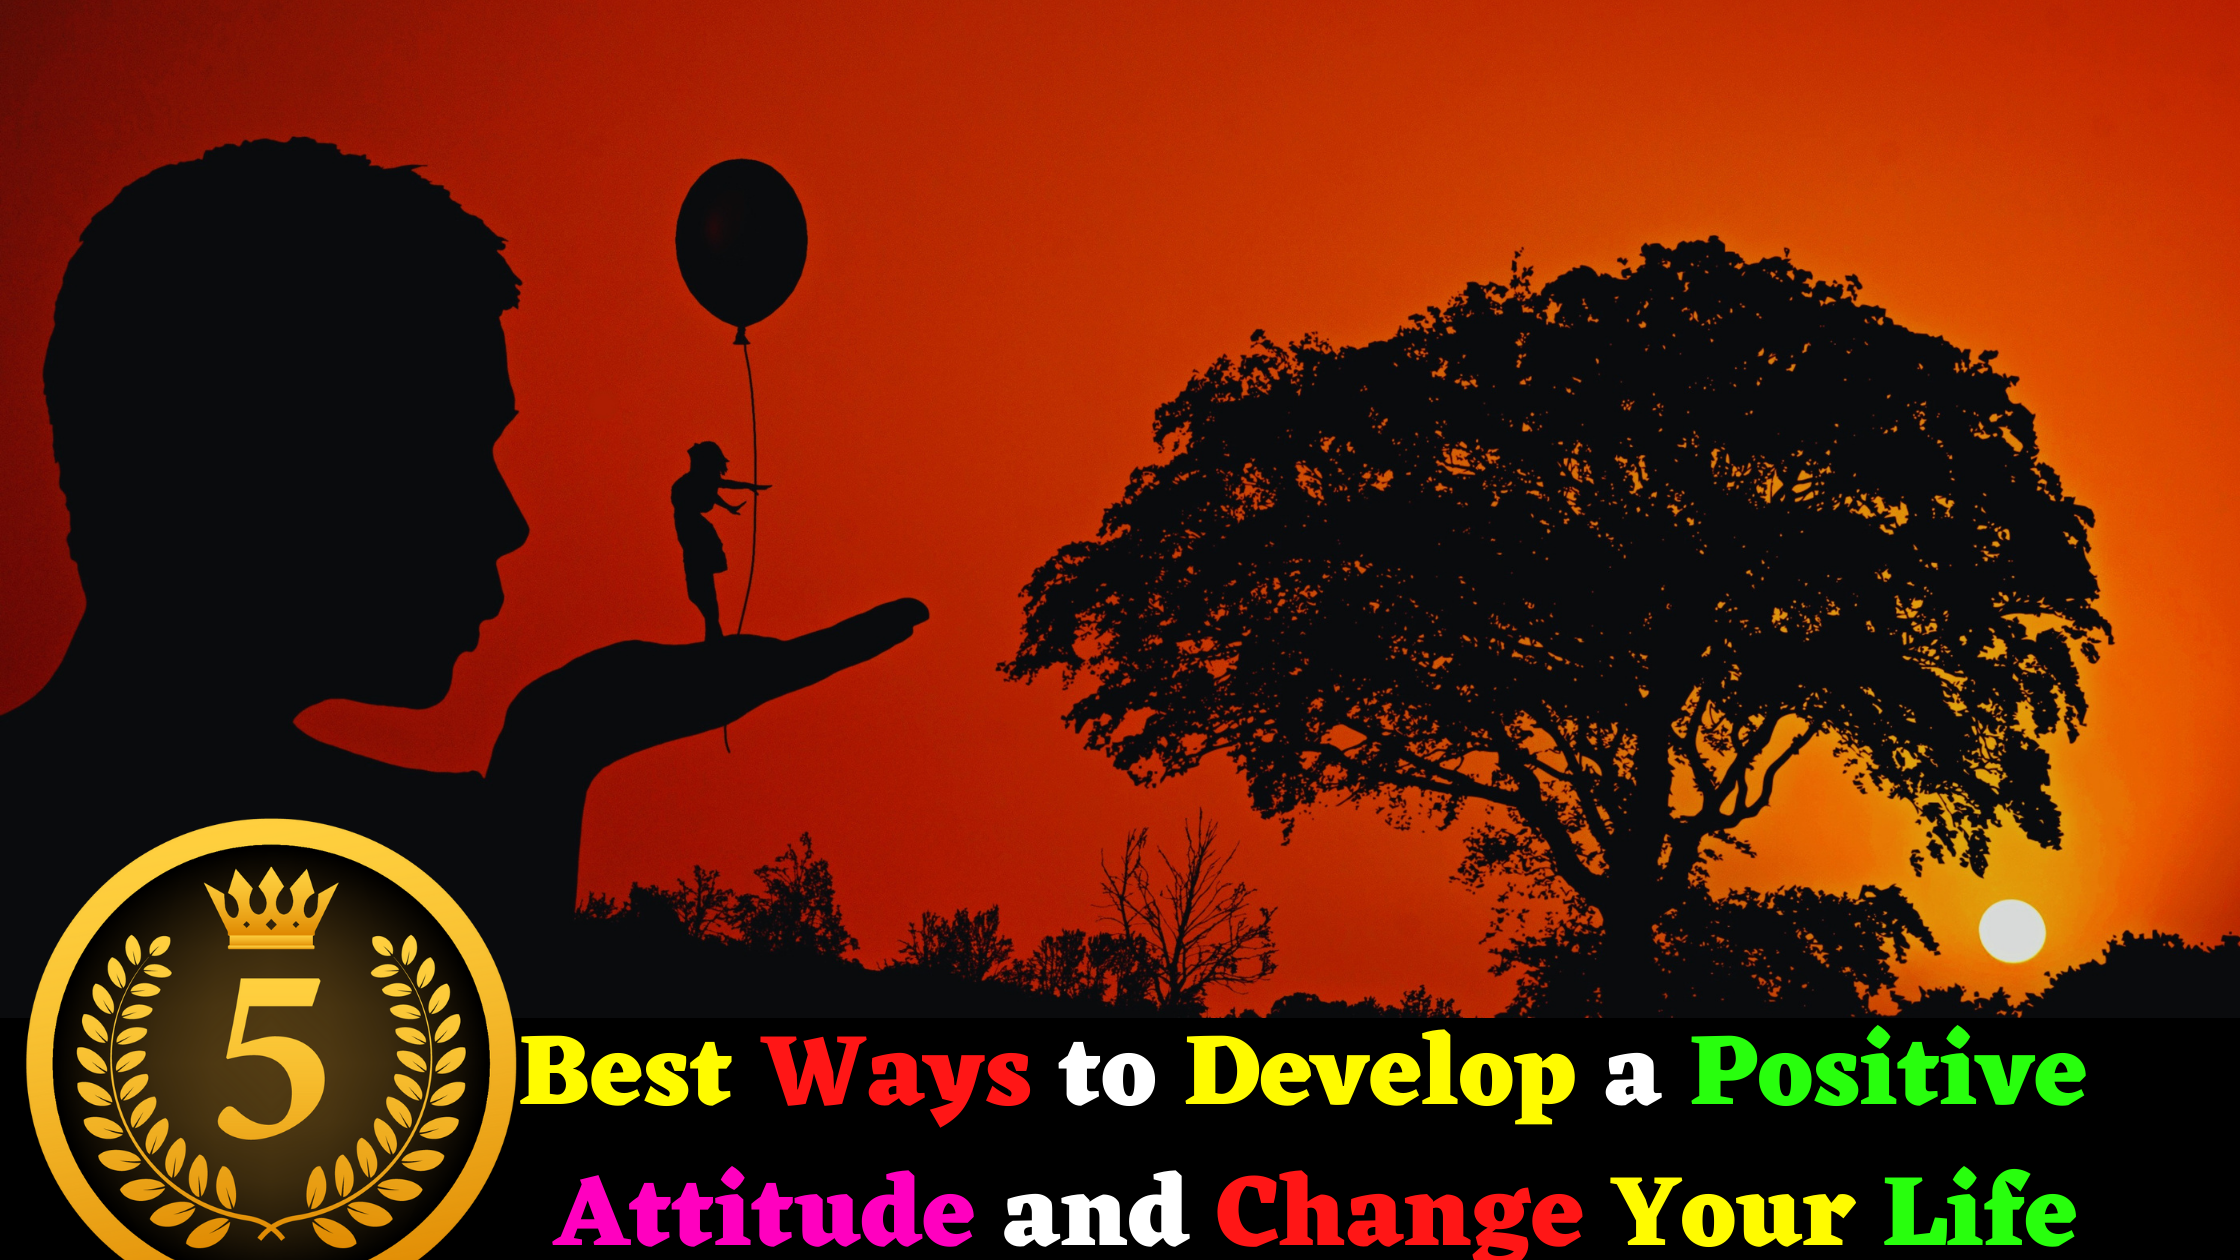 5 Best Ways to Develop a Positive Attitude and Change Your Life